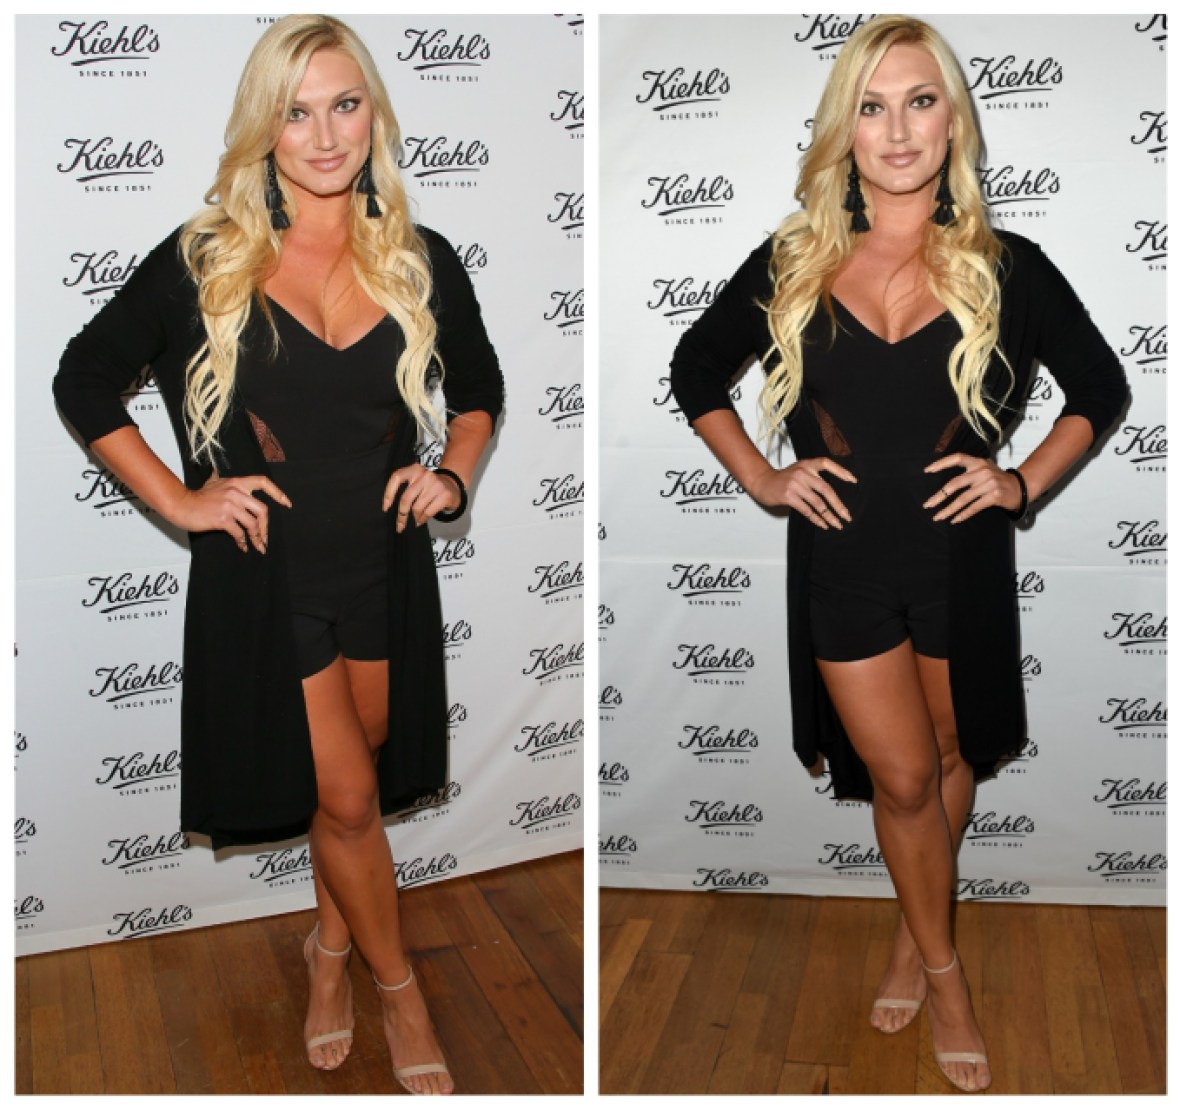 Brooke Hogan Sex Porn - Brooke Hogan is All Grown Up â€” See What She Looks Like Now - In Touch Weekly